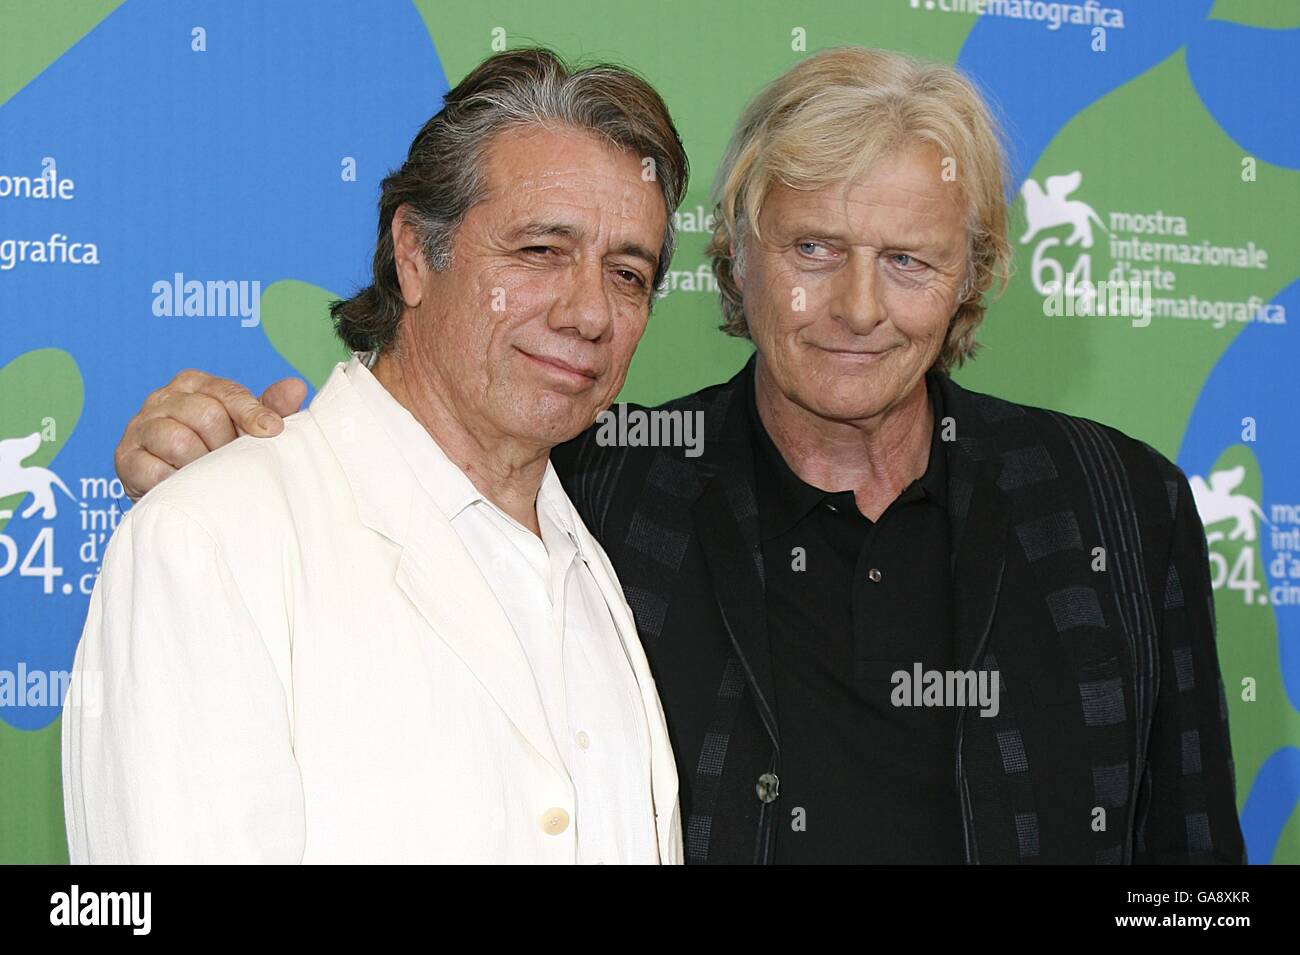 Edward James Olmos and Rutger Hauer during a photocall for the film 'Blade Runner: The Final Cut', at the Venice Film Festival in Italy, Saturday 1 September 2007. Stock Photo